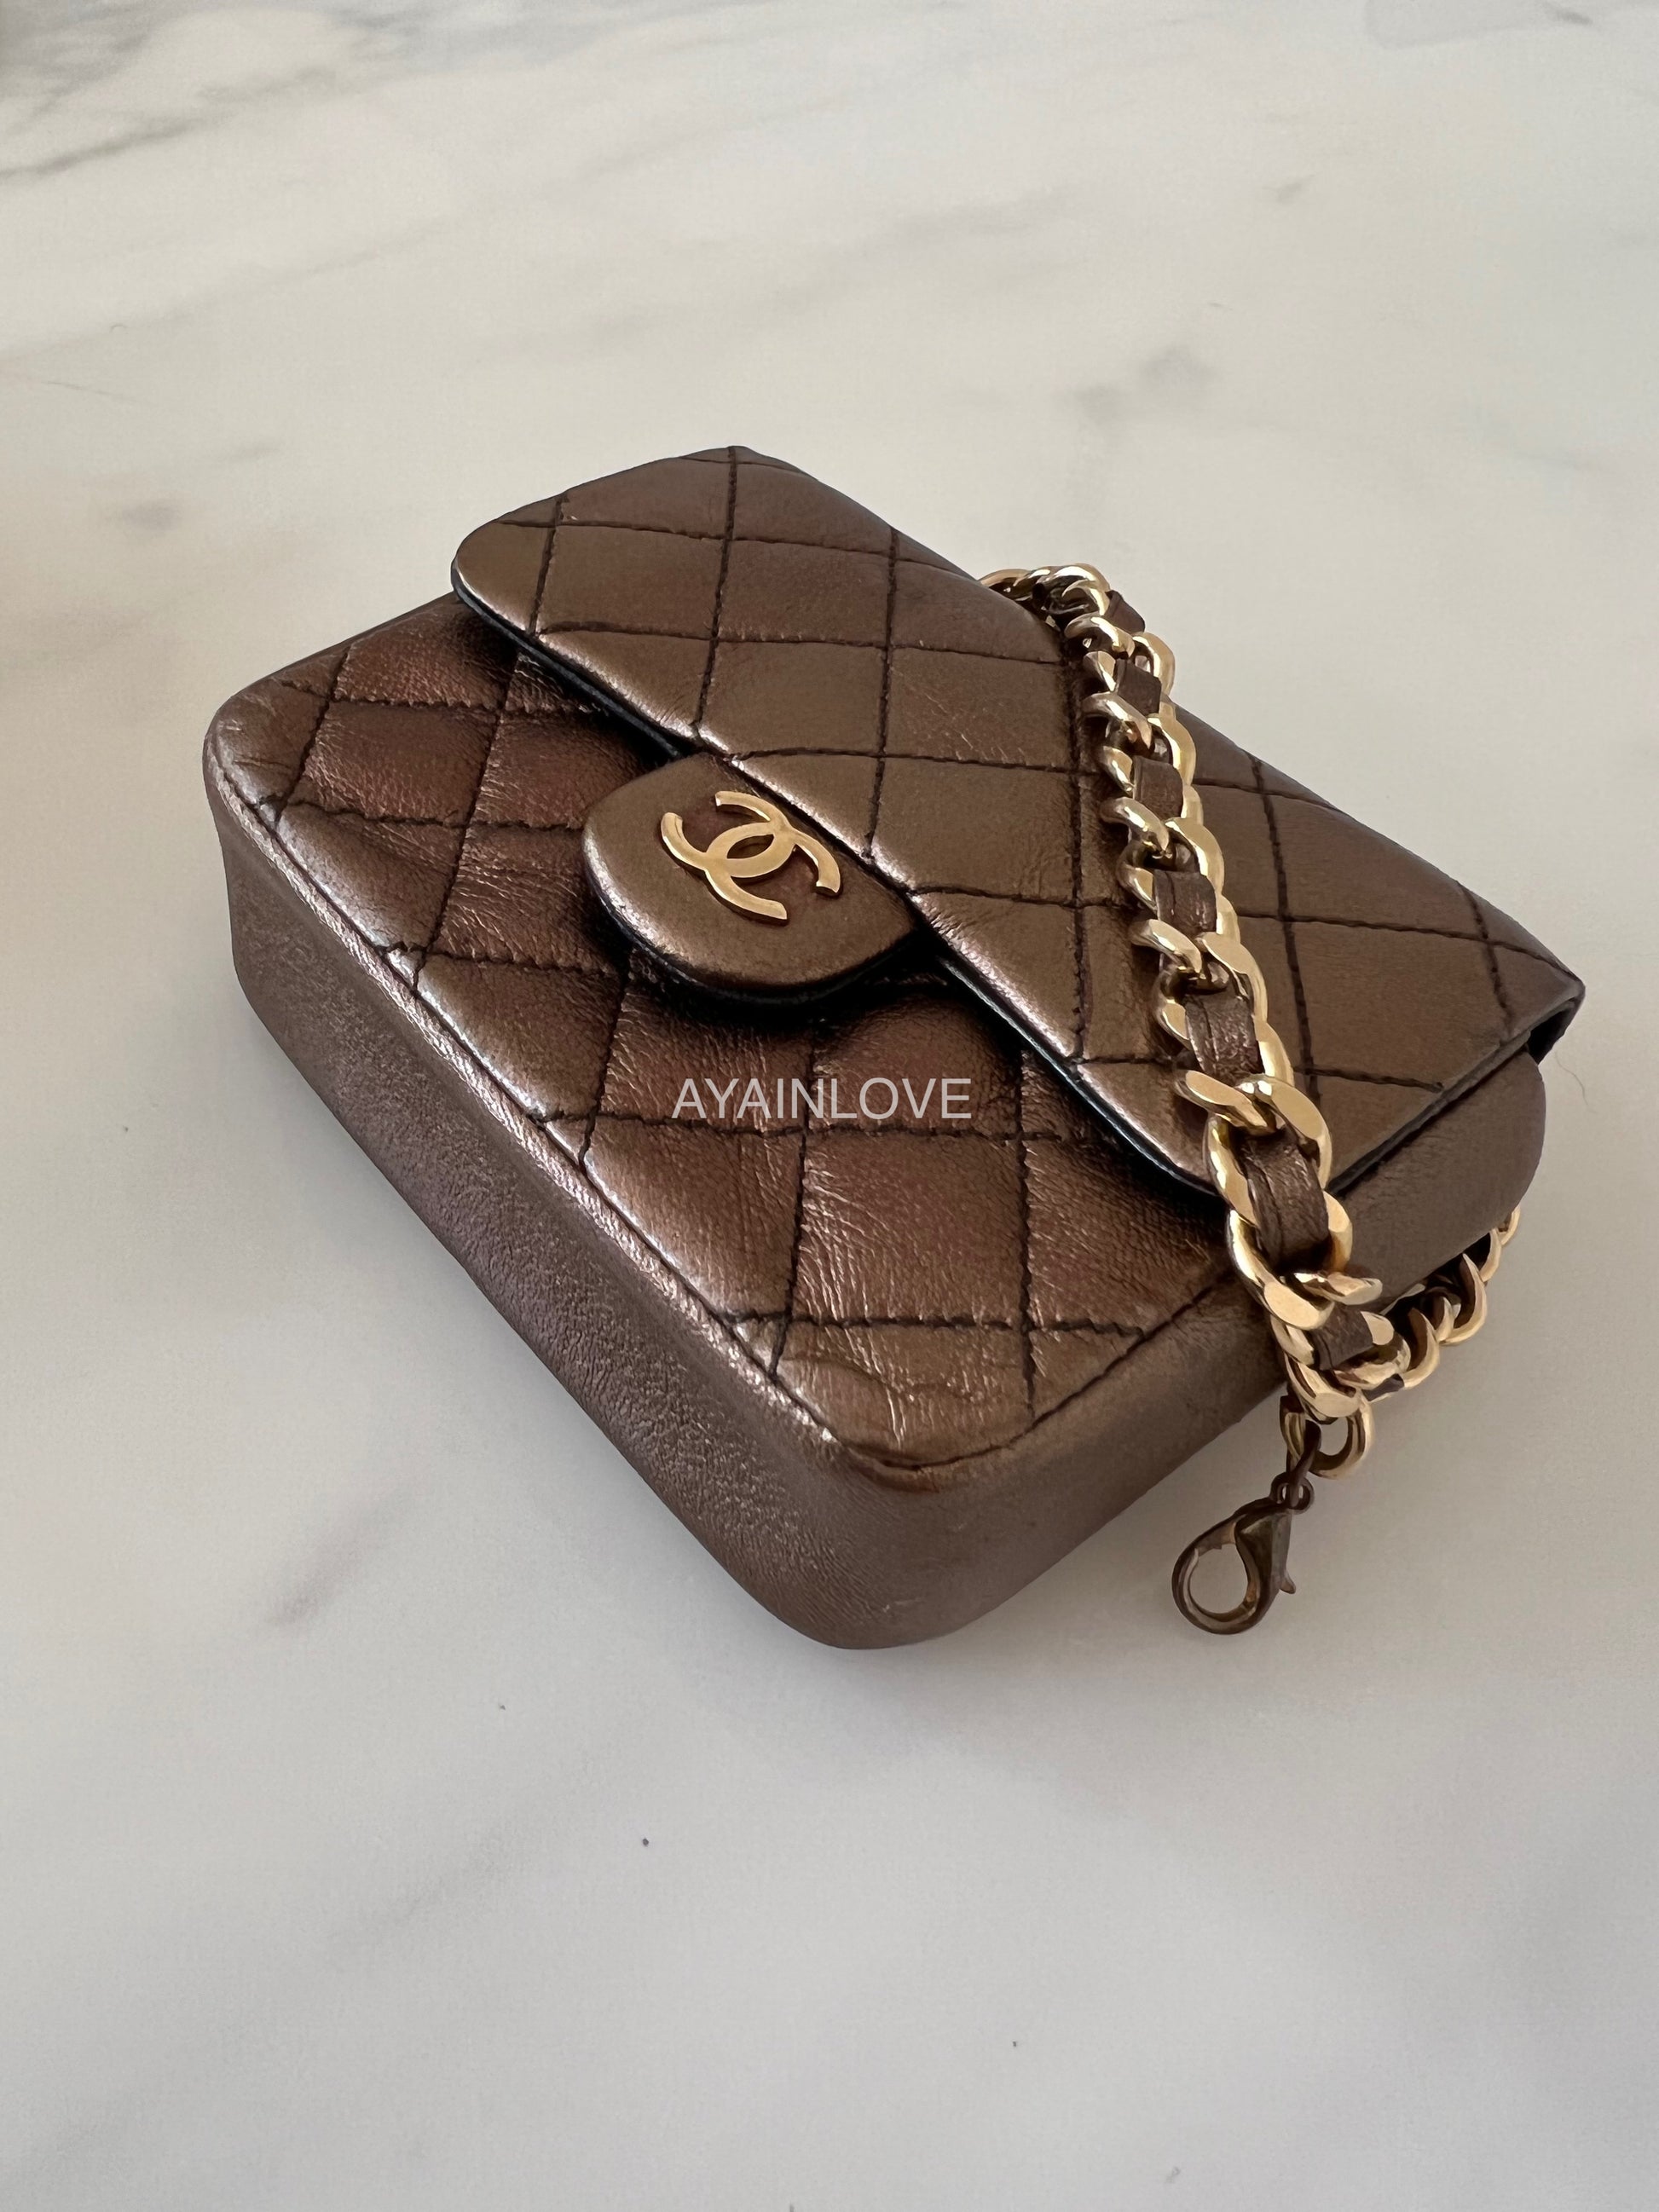 Replica Chanel Vintage Calfskin Mini / Small Flap Bag with Gold Charm